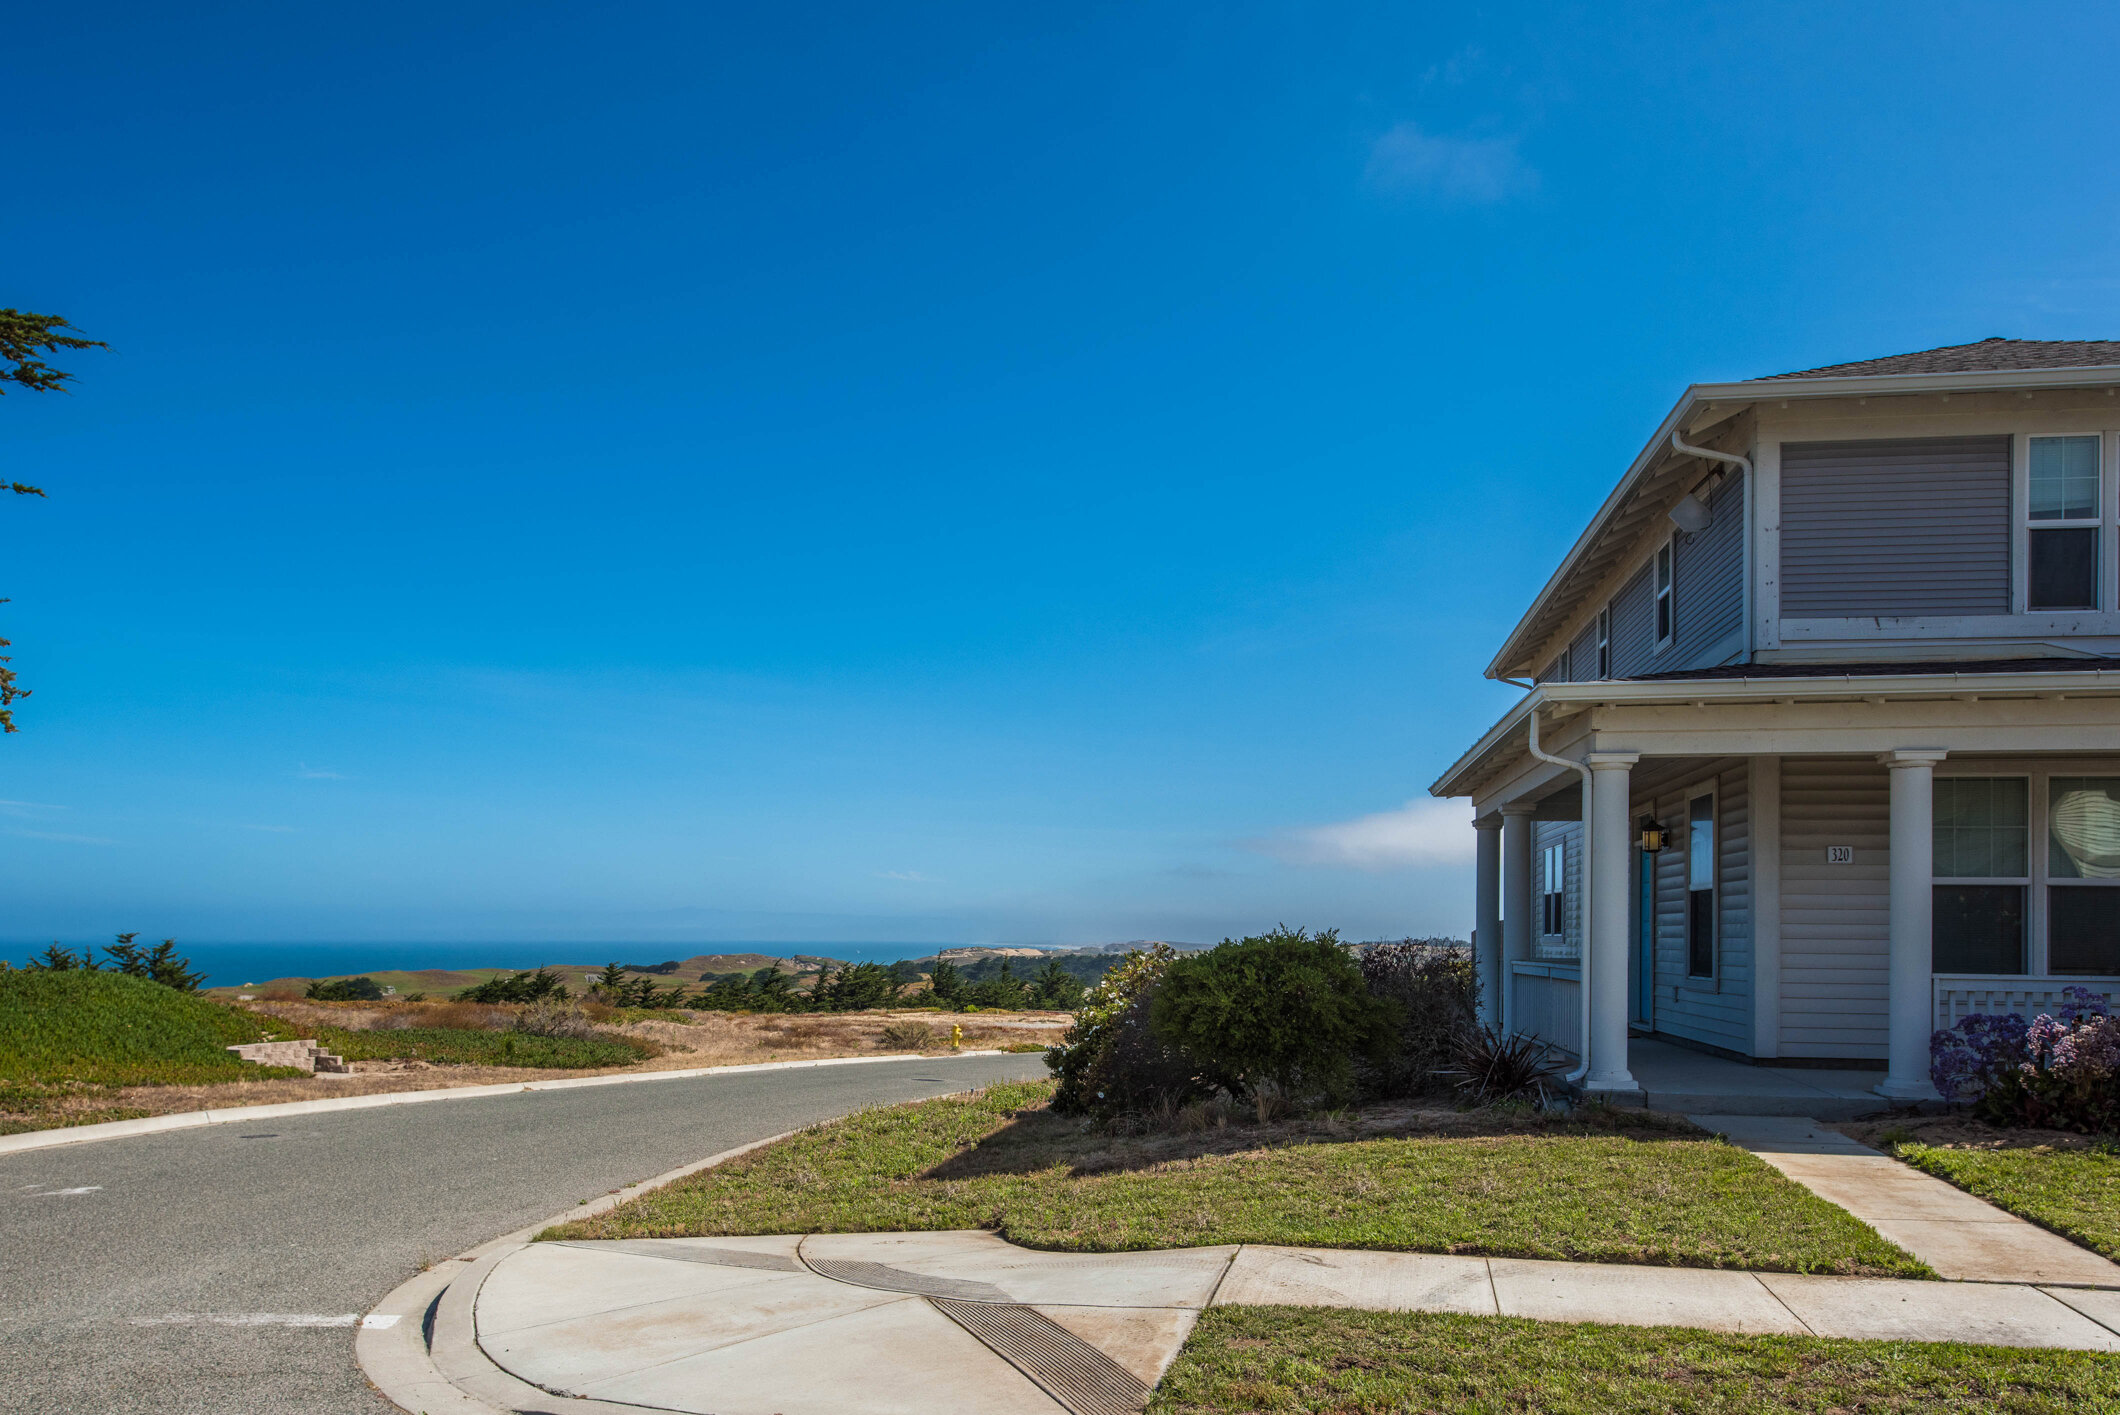 The Parks at Monterey neighborhoods offer close proximity to local shopping centers and beautiful vistas.